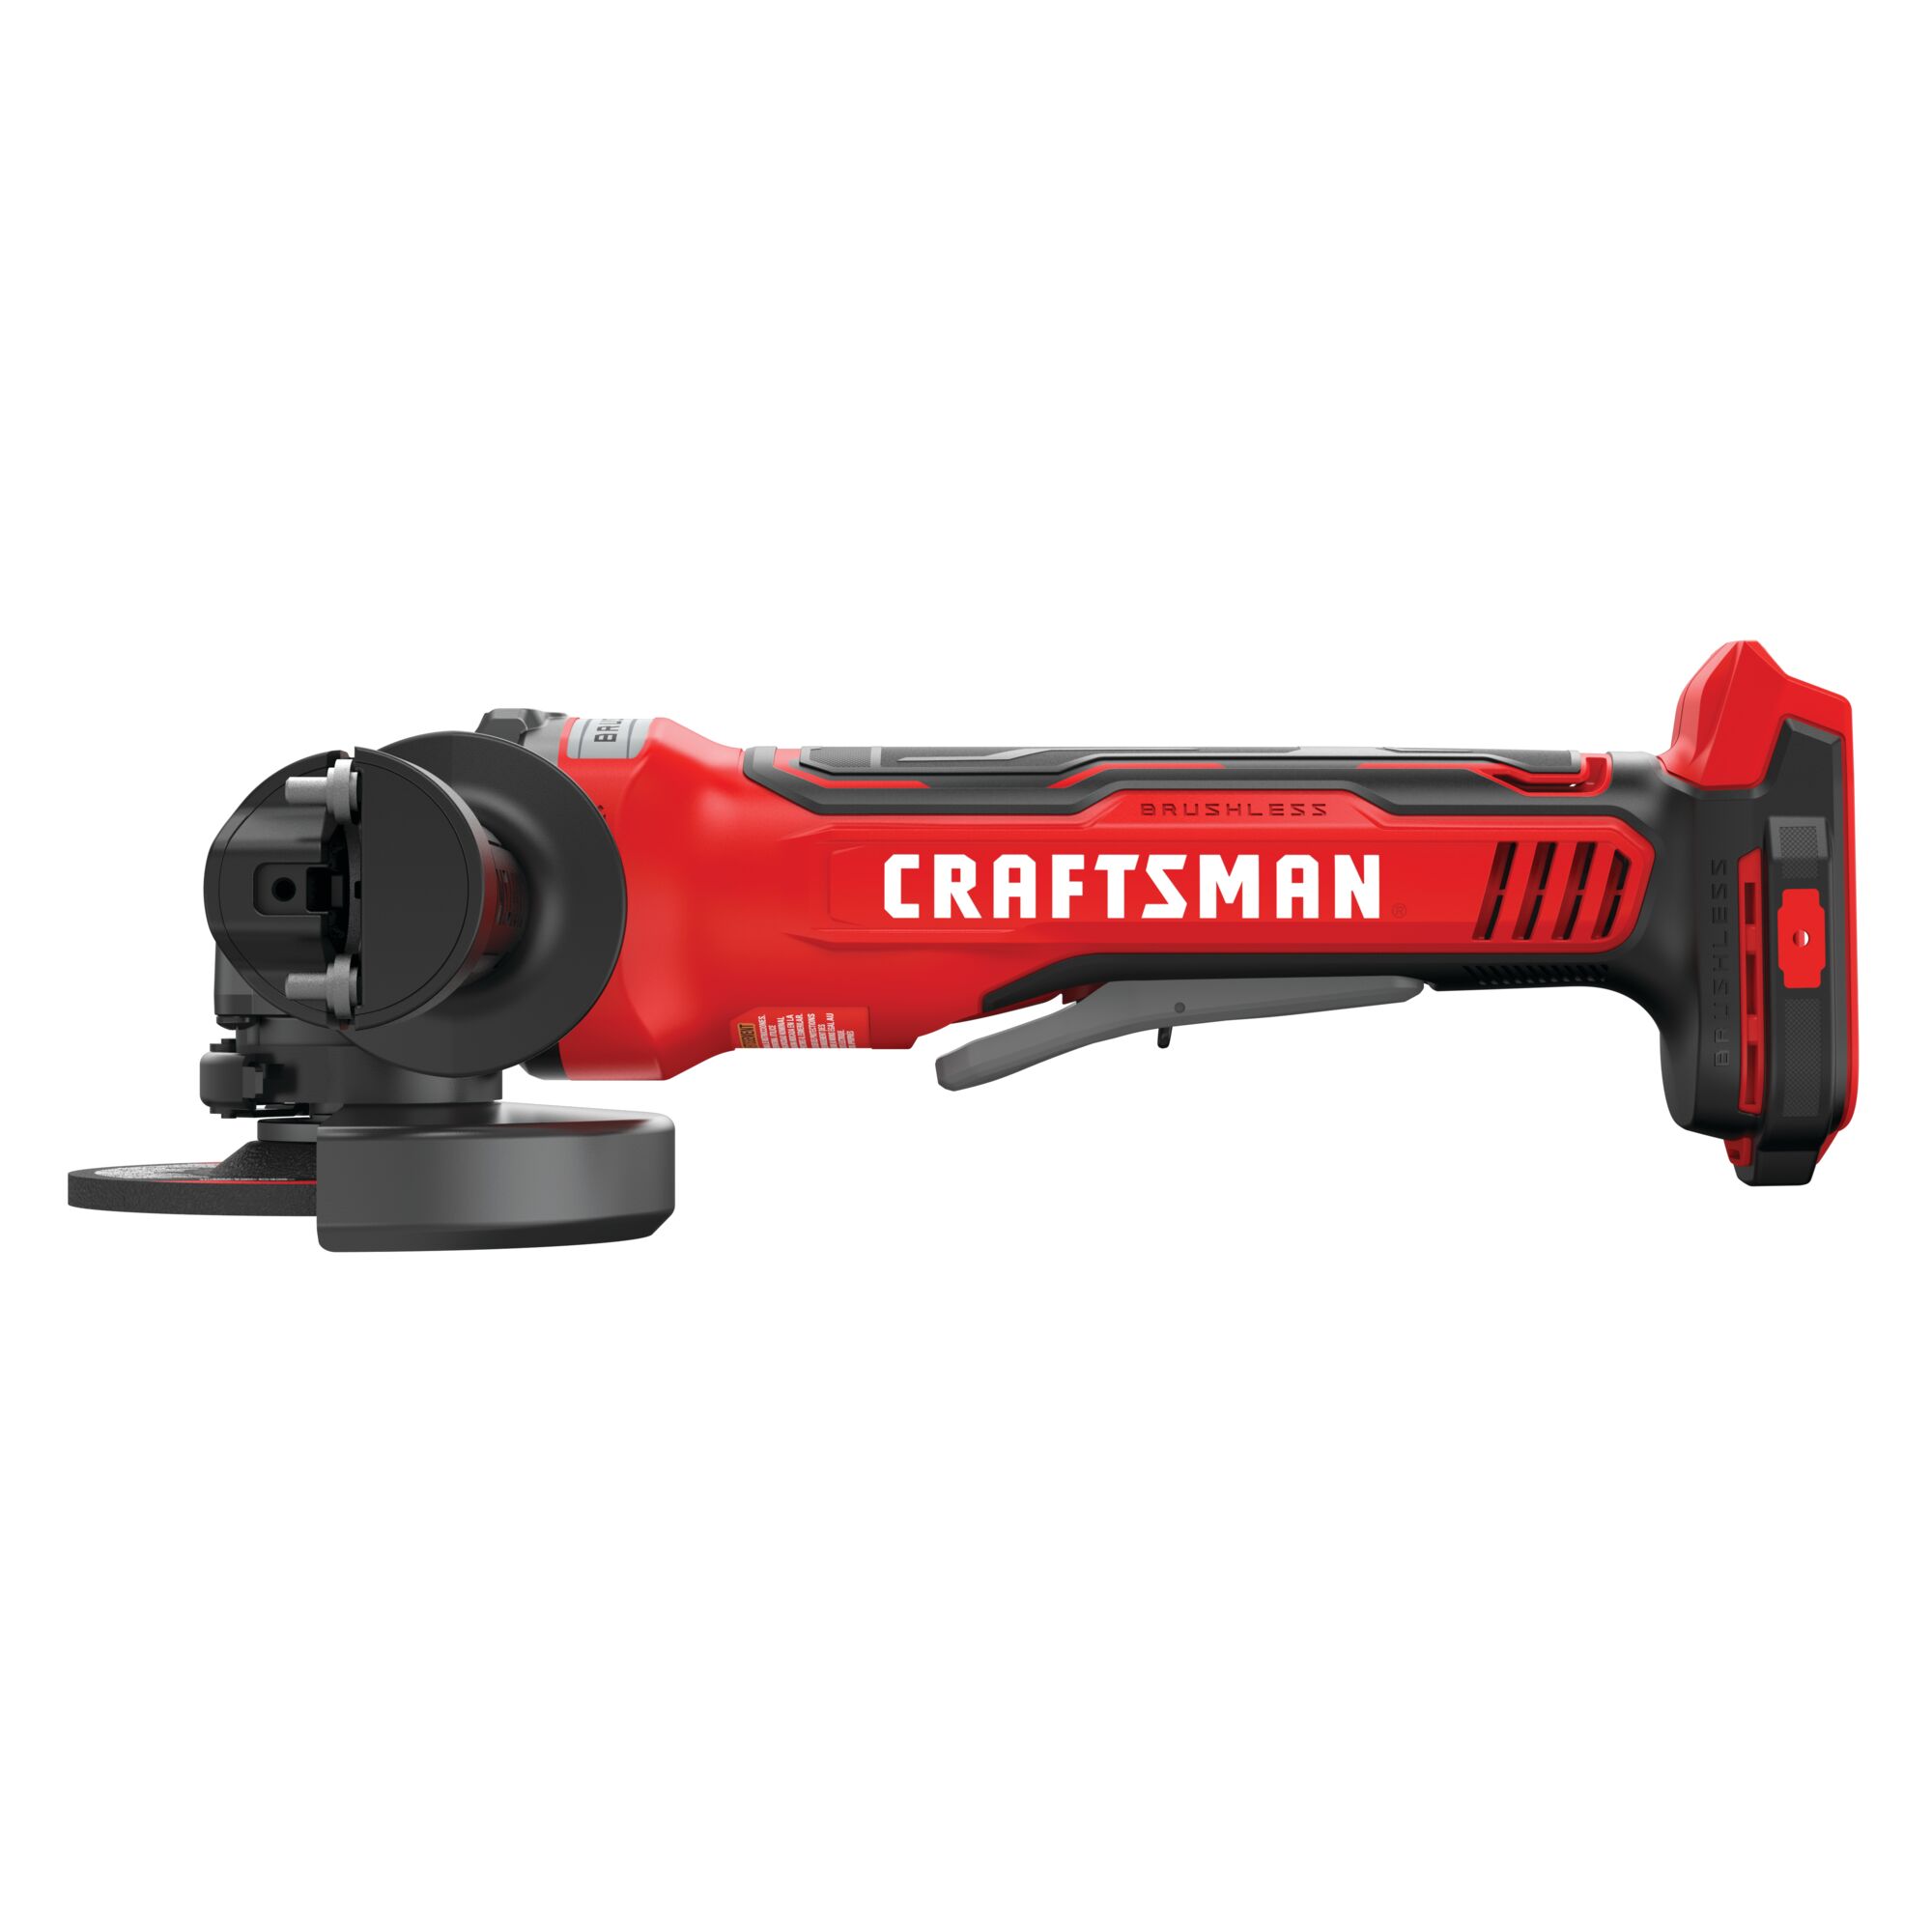 View of CRAFTSMAN Angle Grinder on white background